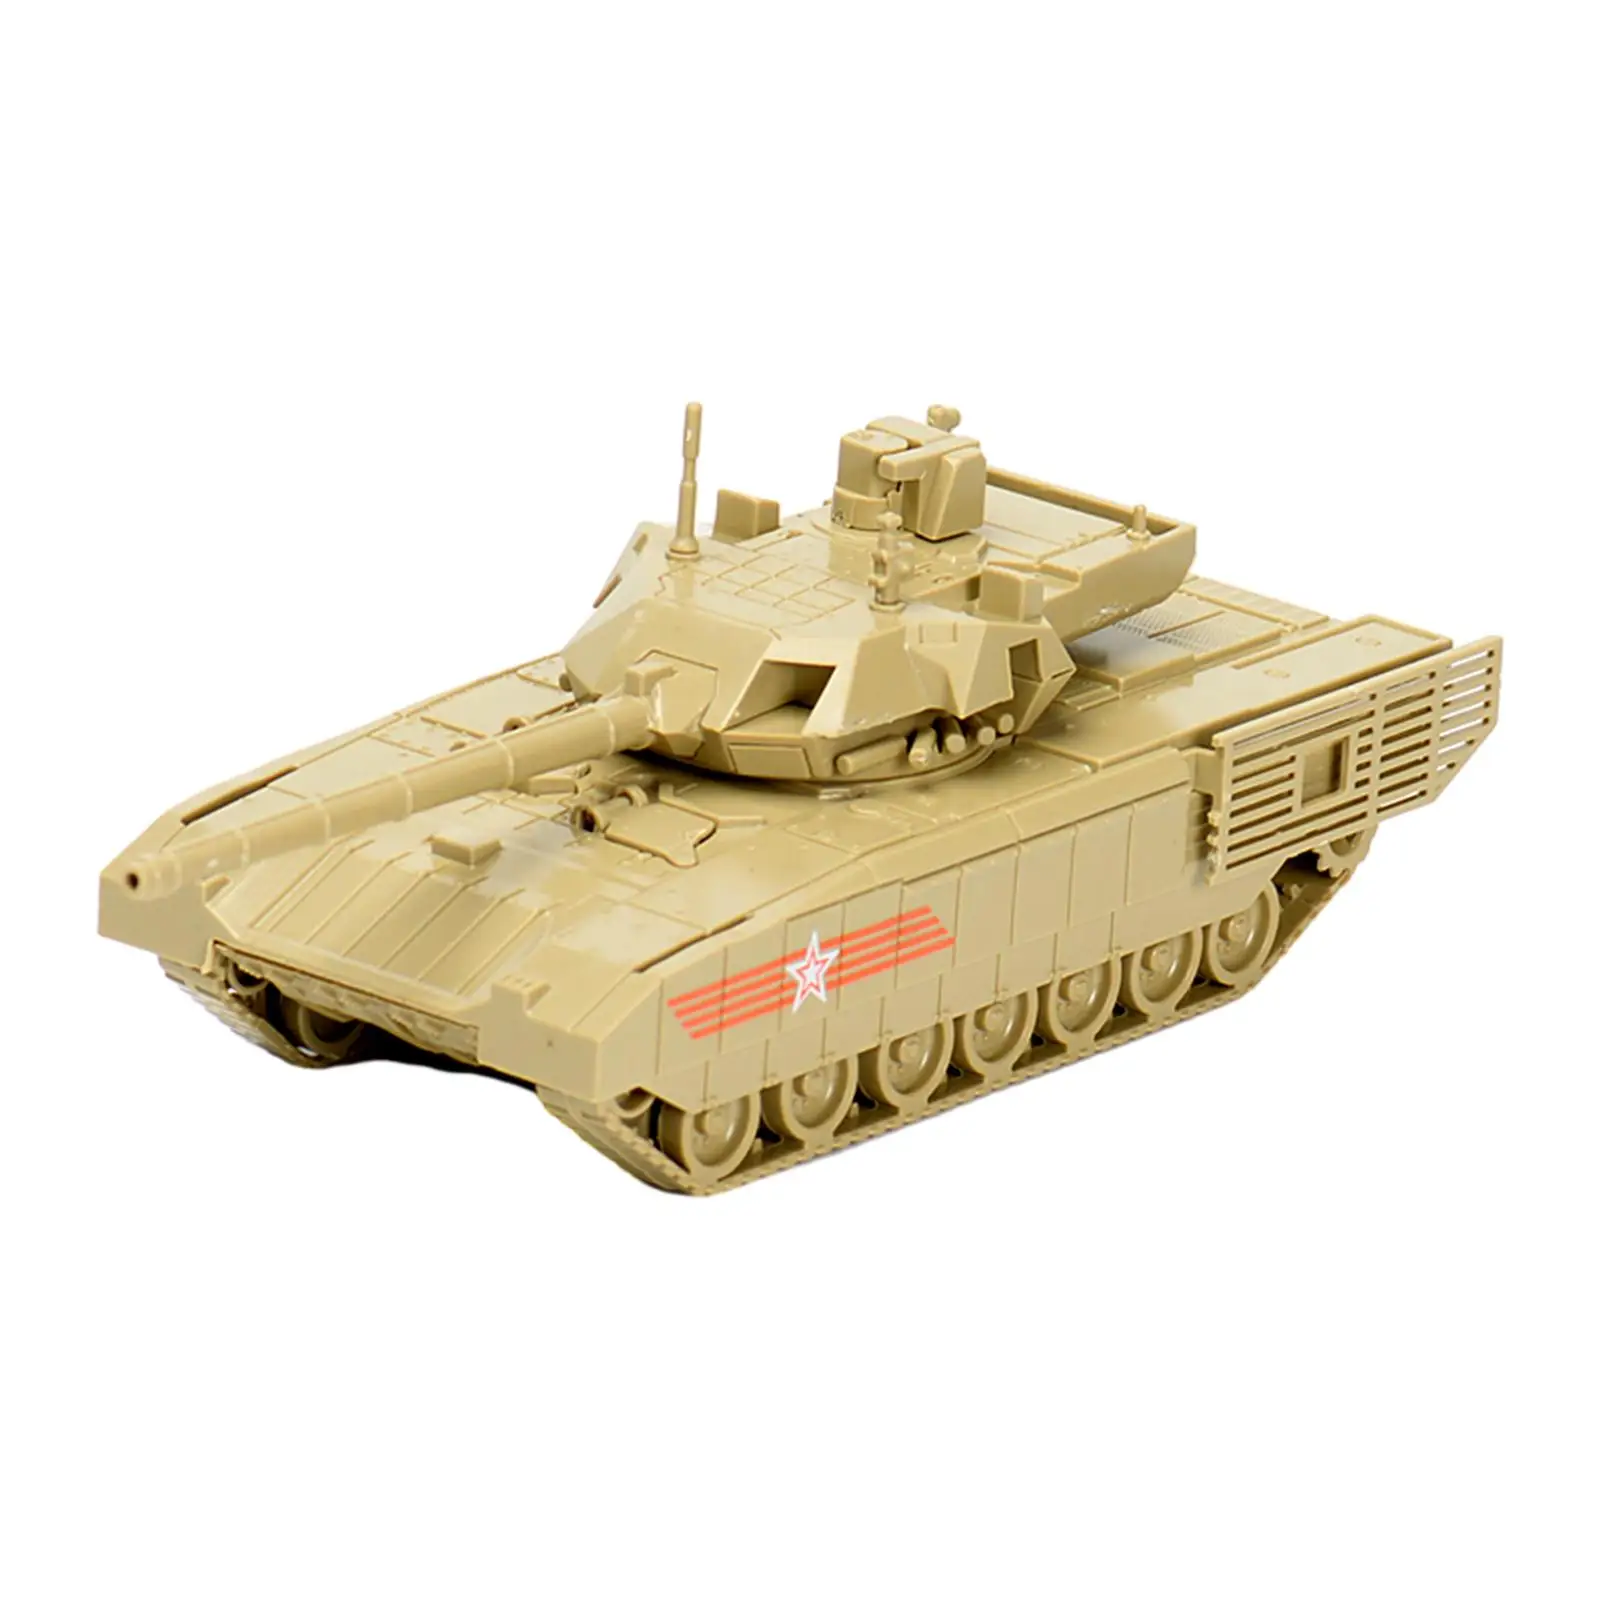 1:72 Armored Vehicles Reconnaissance Vehicles Rotation Fort Armored Tank Model for Boys Keepsake Children Gift Collectibles